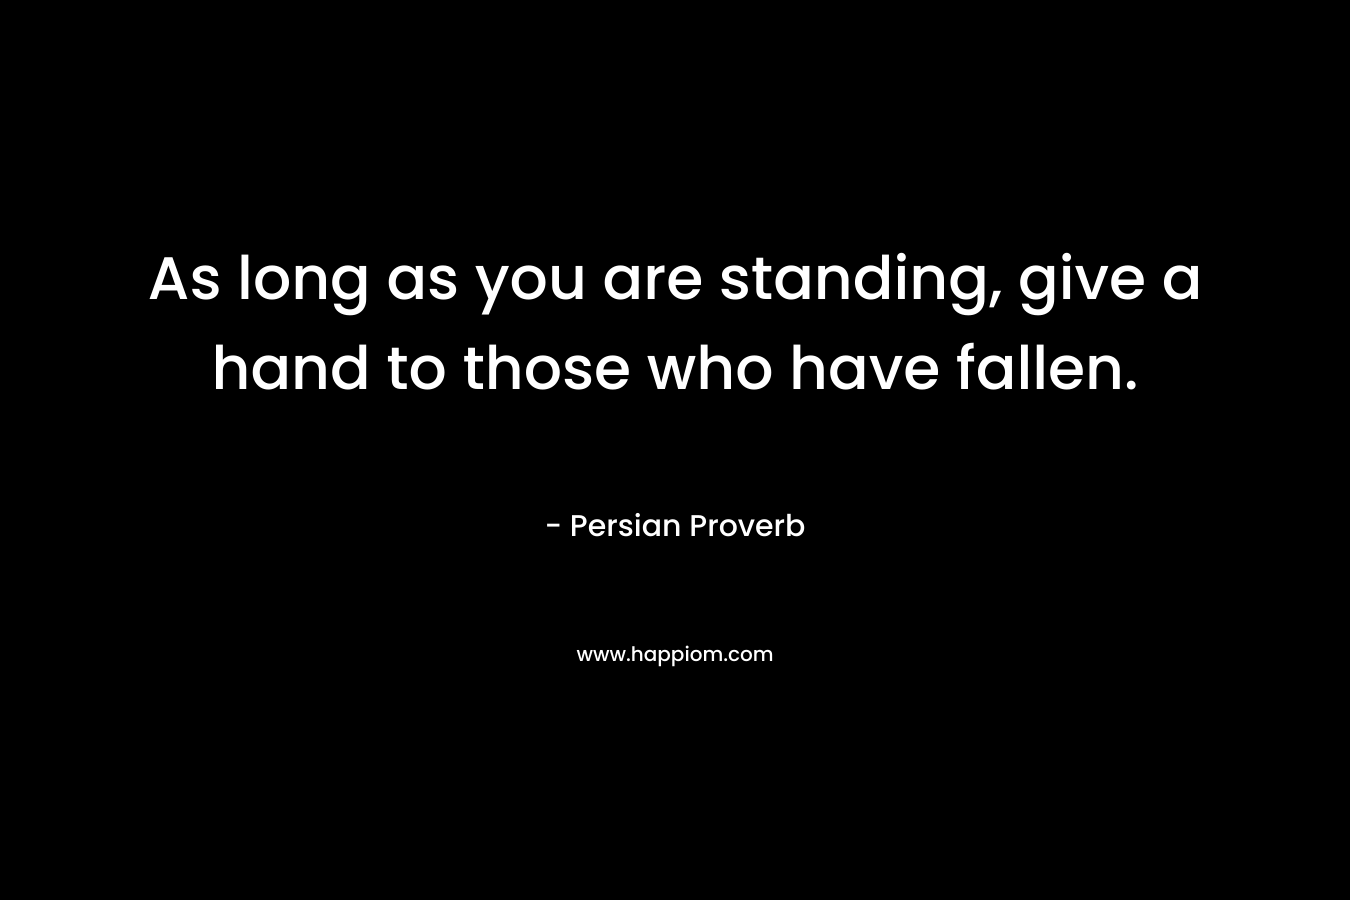 As long as you are standing, give a hand to those who have fallen.